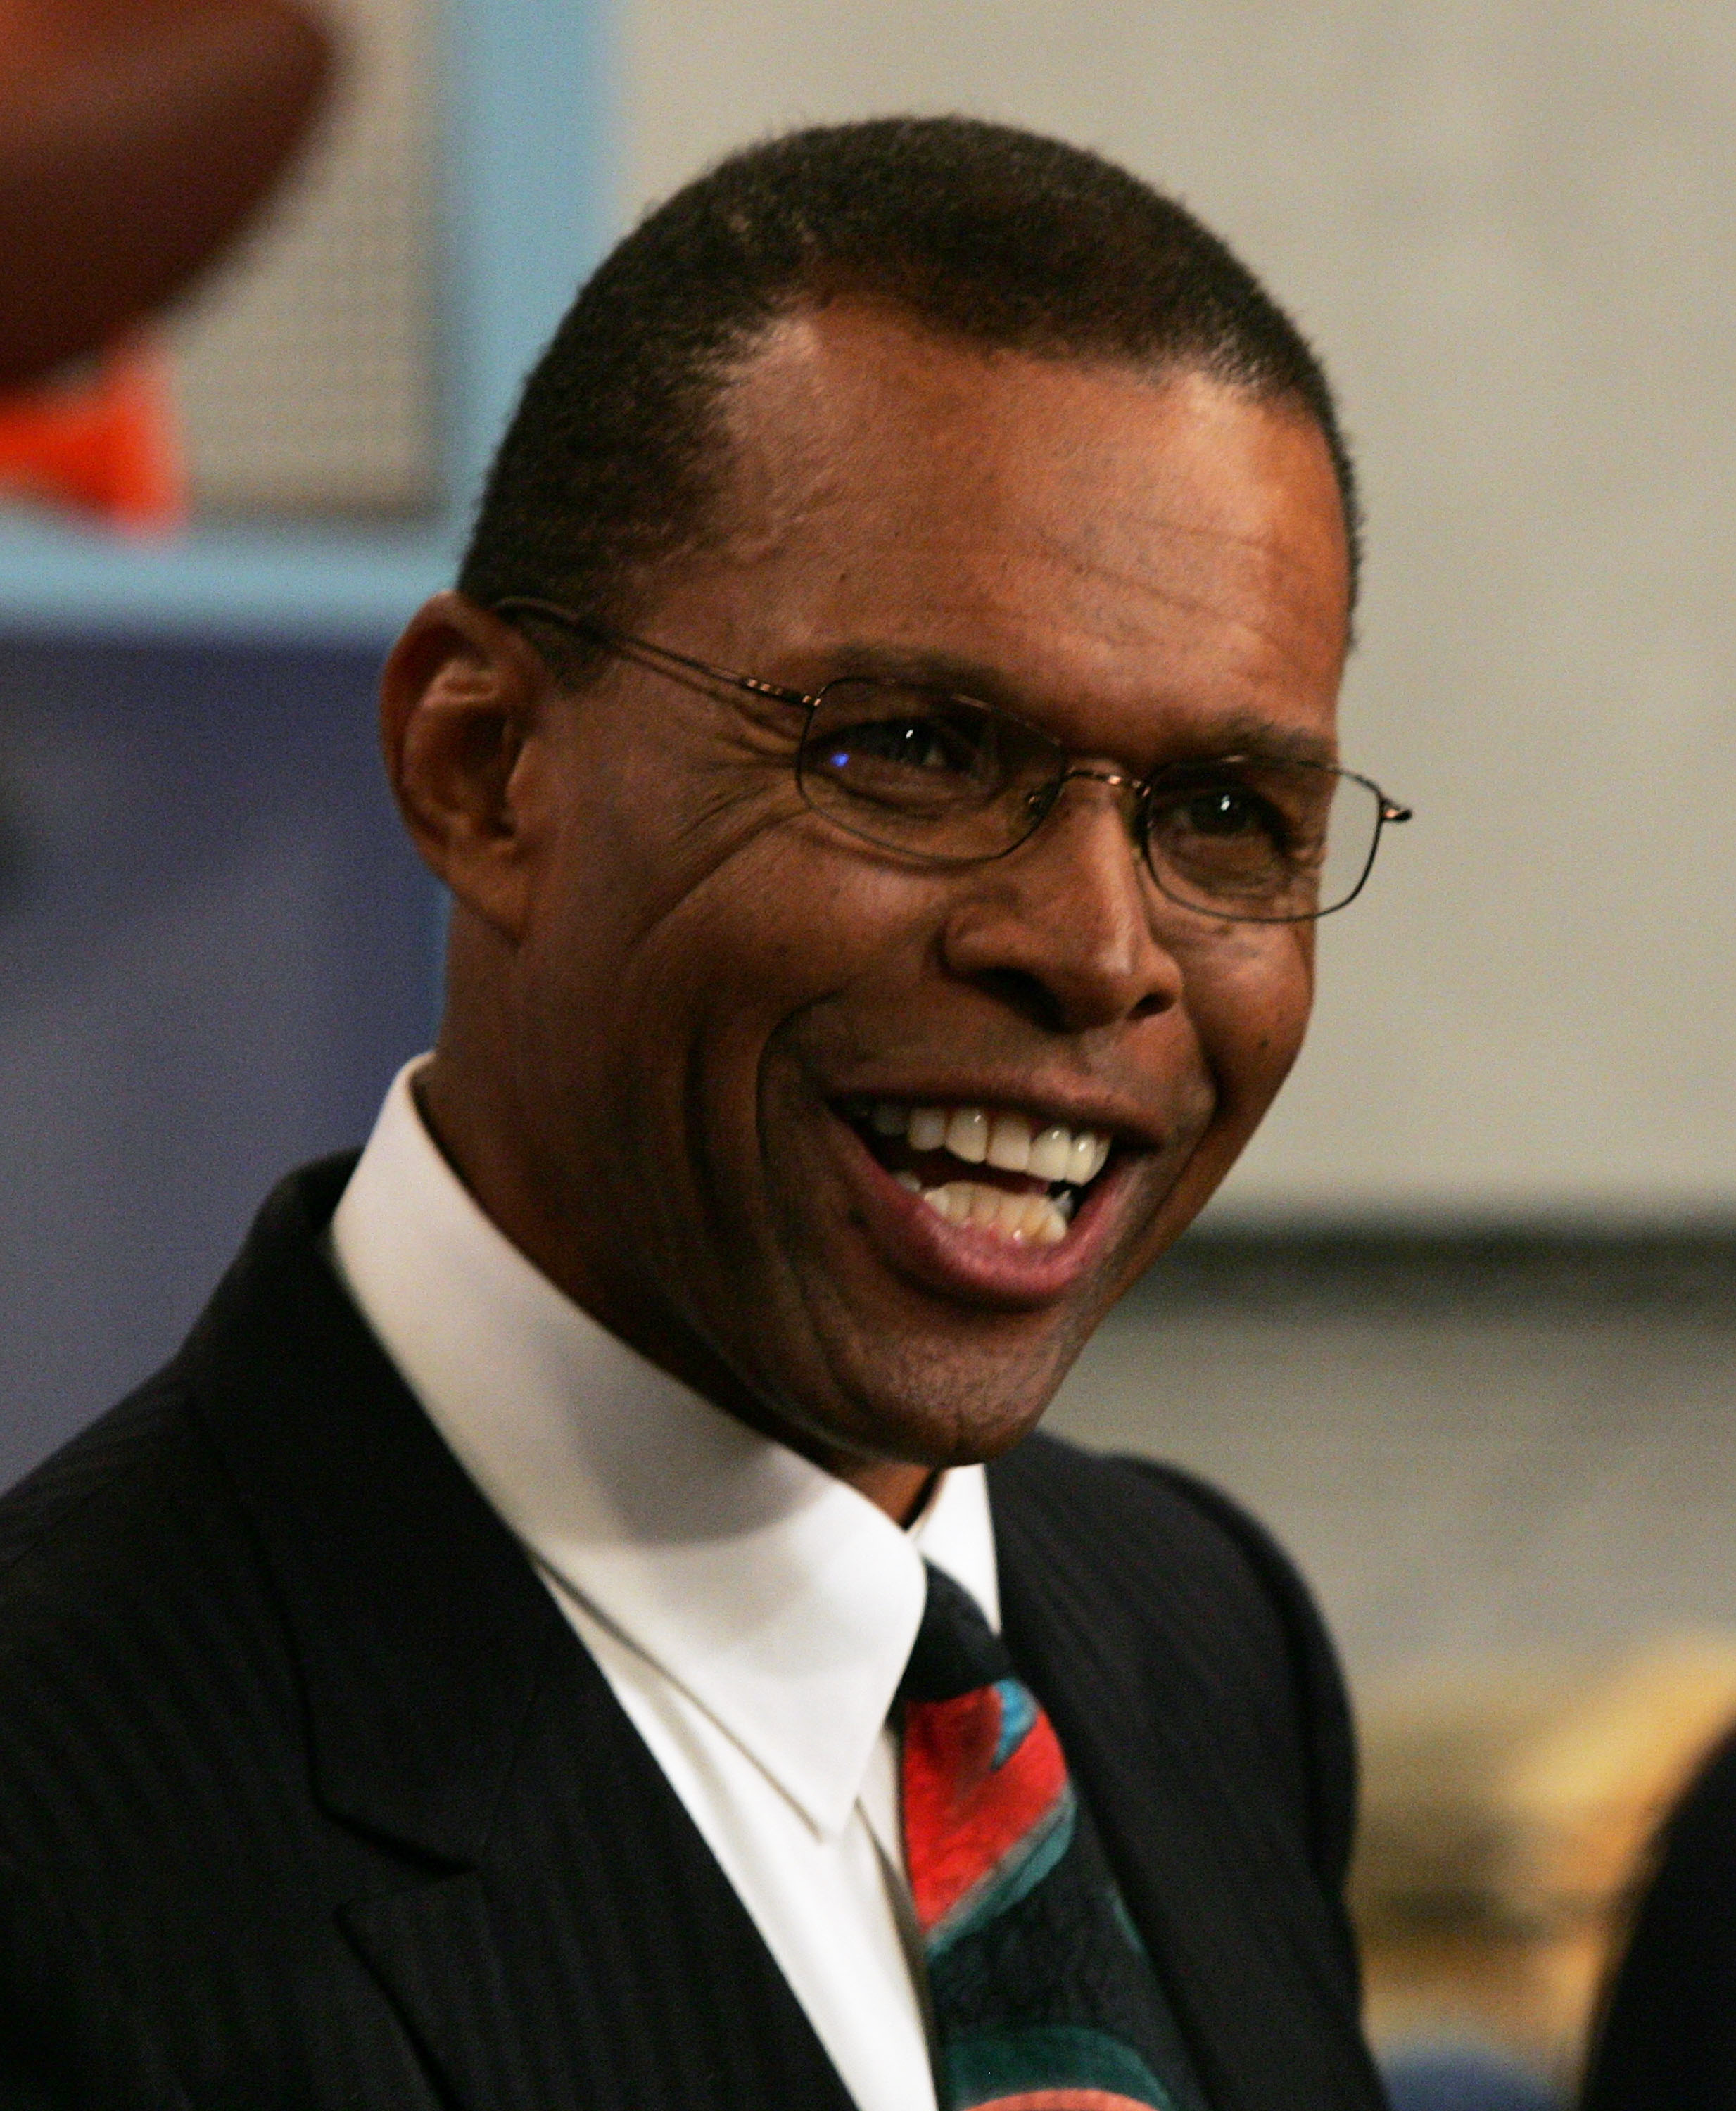 FORT LAUDERDALE, FL - DECEMBER 06:  Former NFL great Gale Sayers shares a laugh during the taping of the NFL Players Week 10th Anniversary on Wheel Of Fortune on December 6, 2005 in Fort Lauderdale, Florida.  (Photo by Doug Benc/Getty Images for PLAYERS I